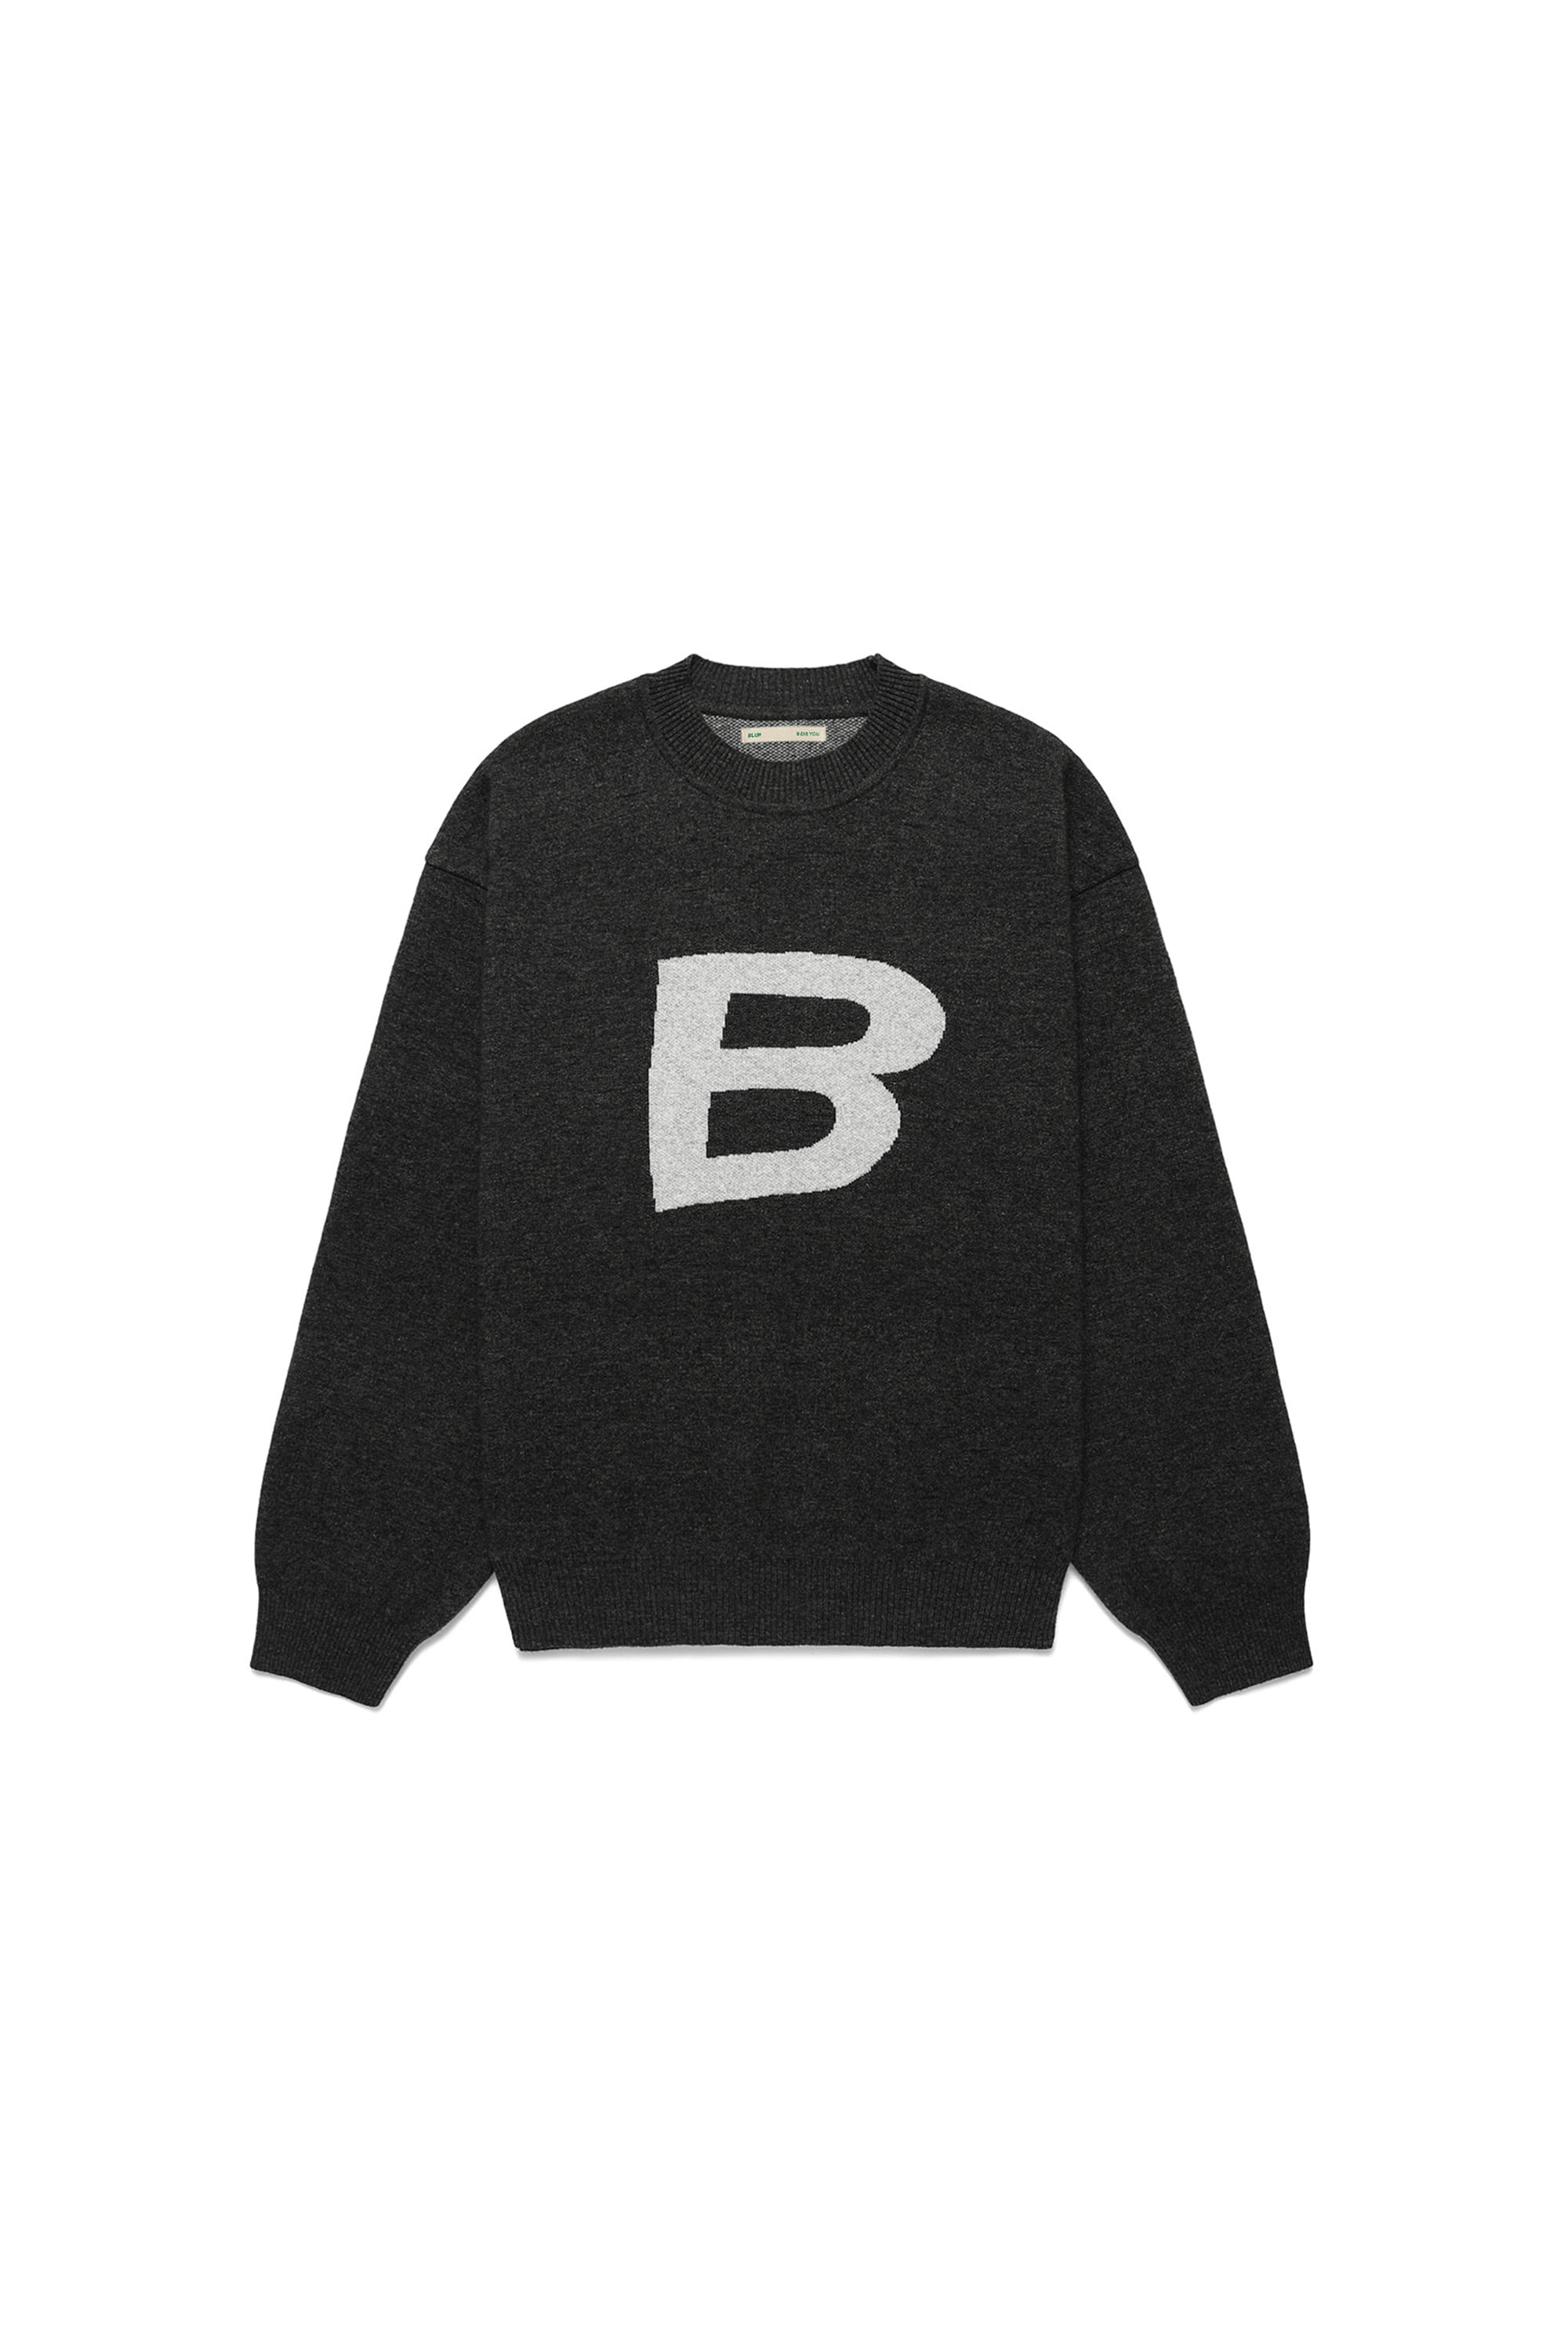 B LOGO KNIT PULLOVER - CHARCOAL